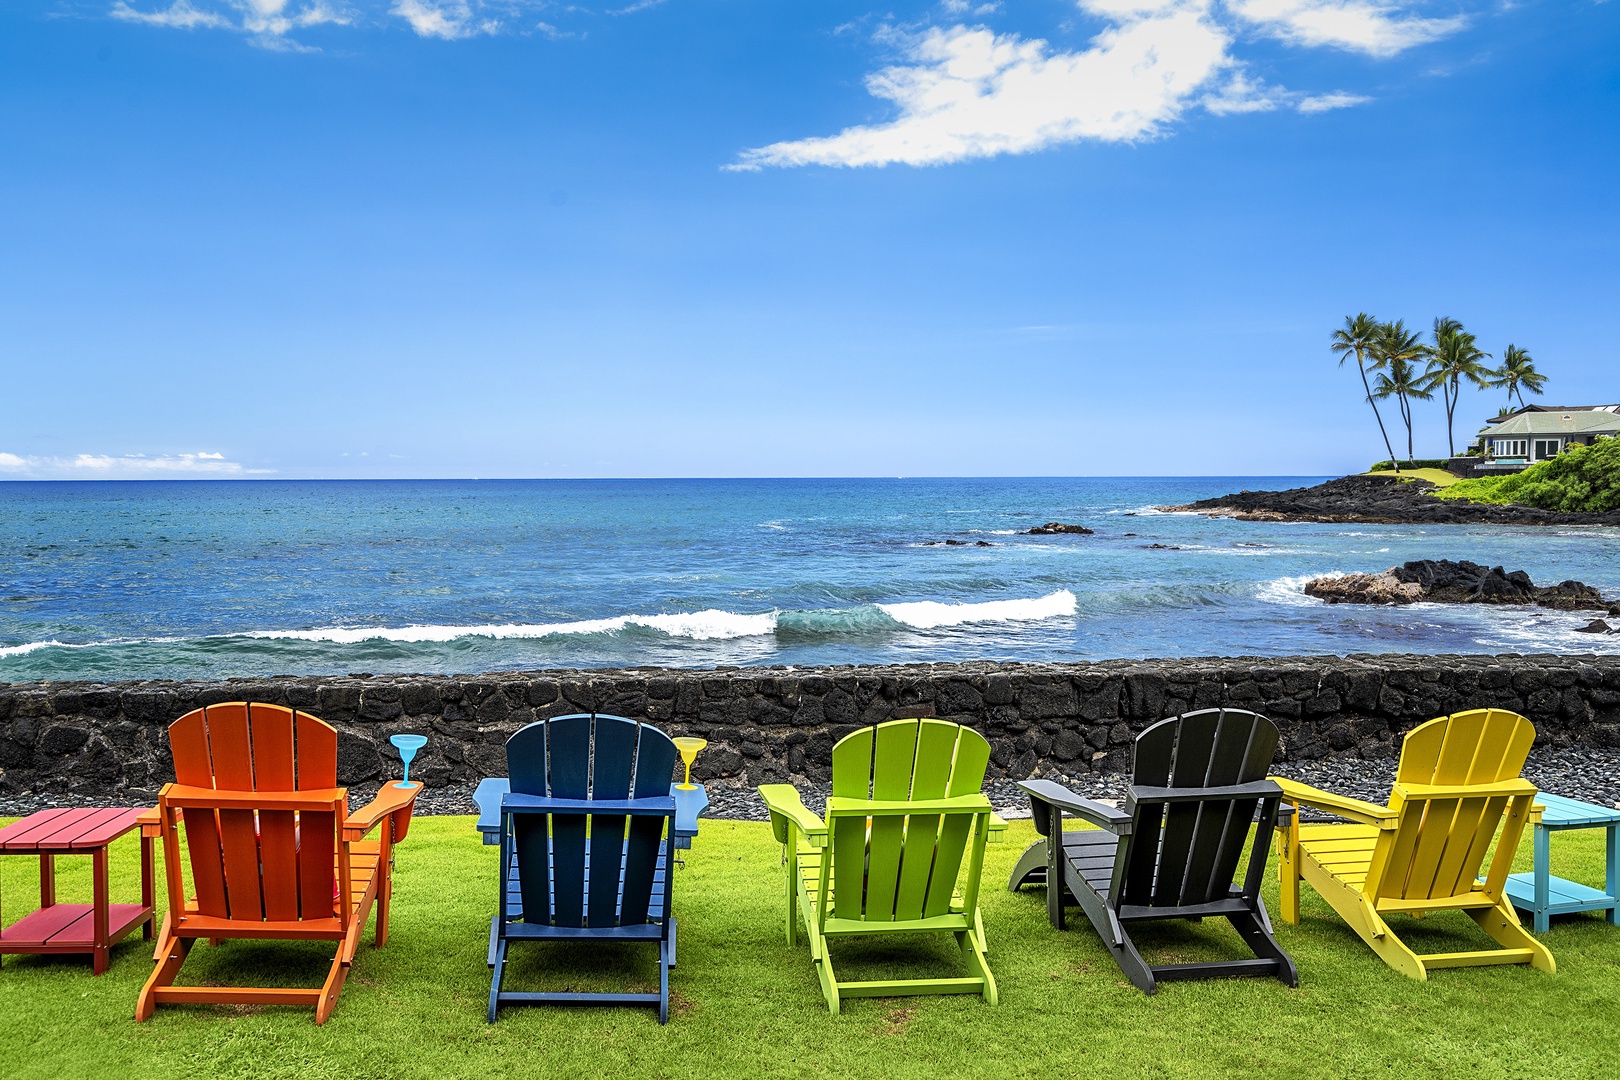 Kailua Kona Vacation Rentals, Hale Pua - Watch the waves roll in as your troubles melt away!